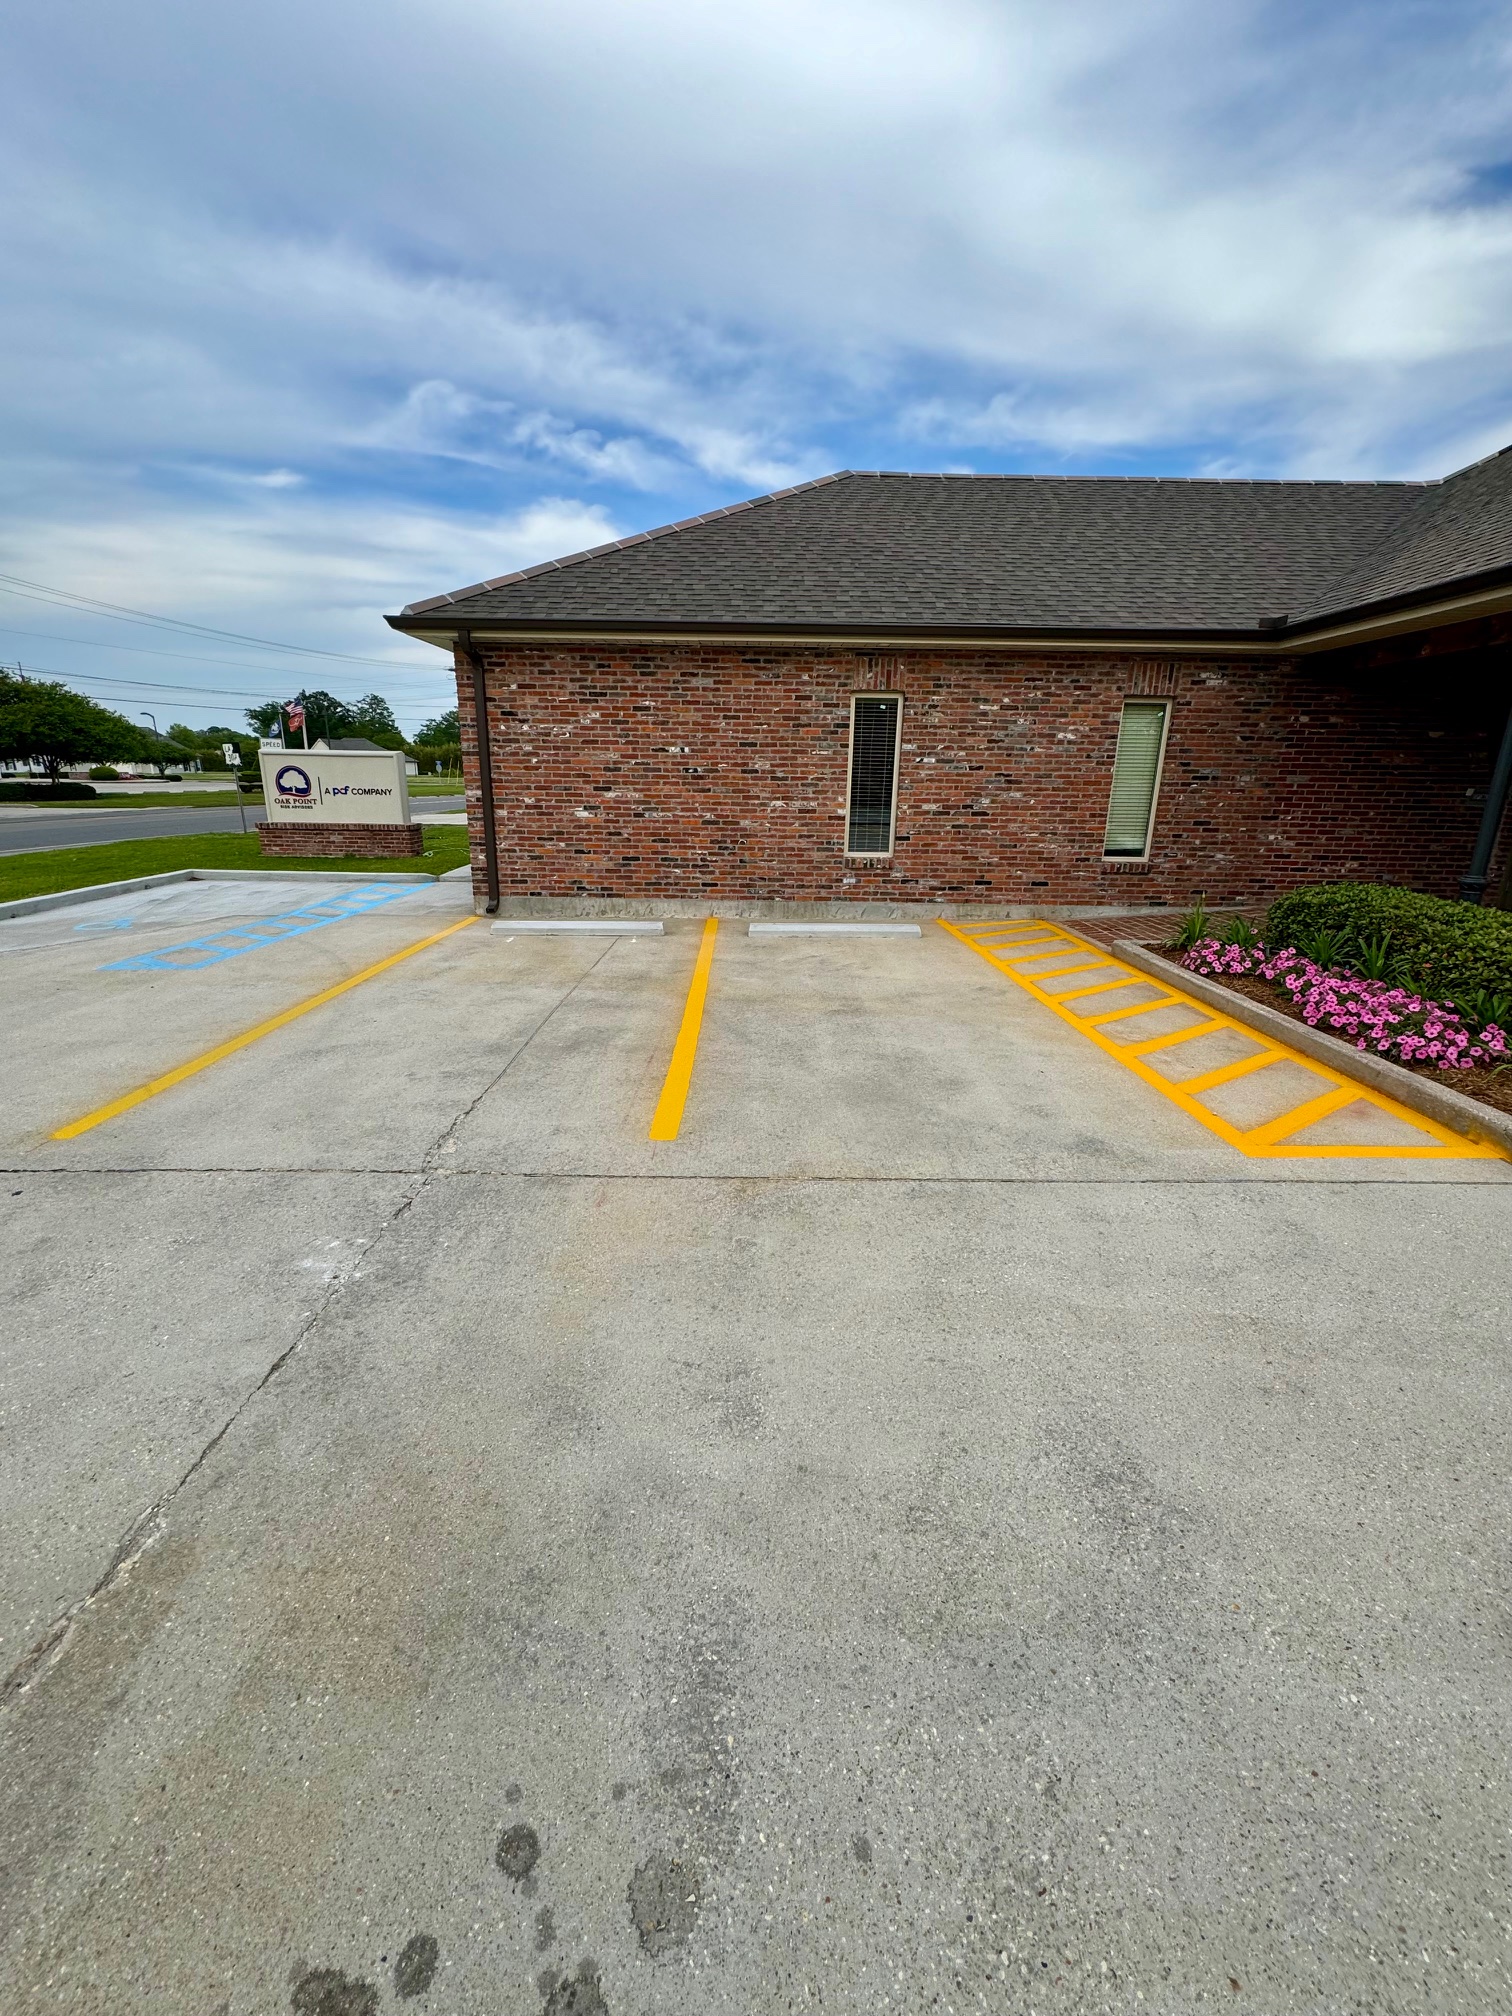 excellent Parking Lot striping in Thiboduax Louisiana 